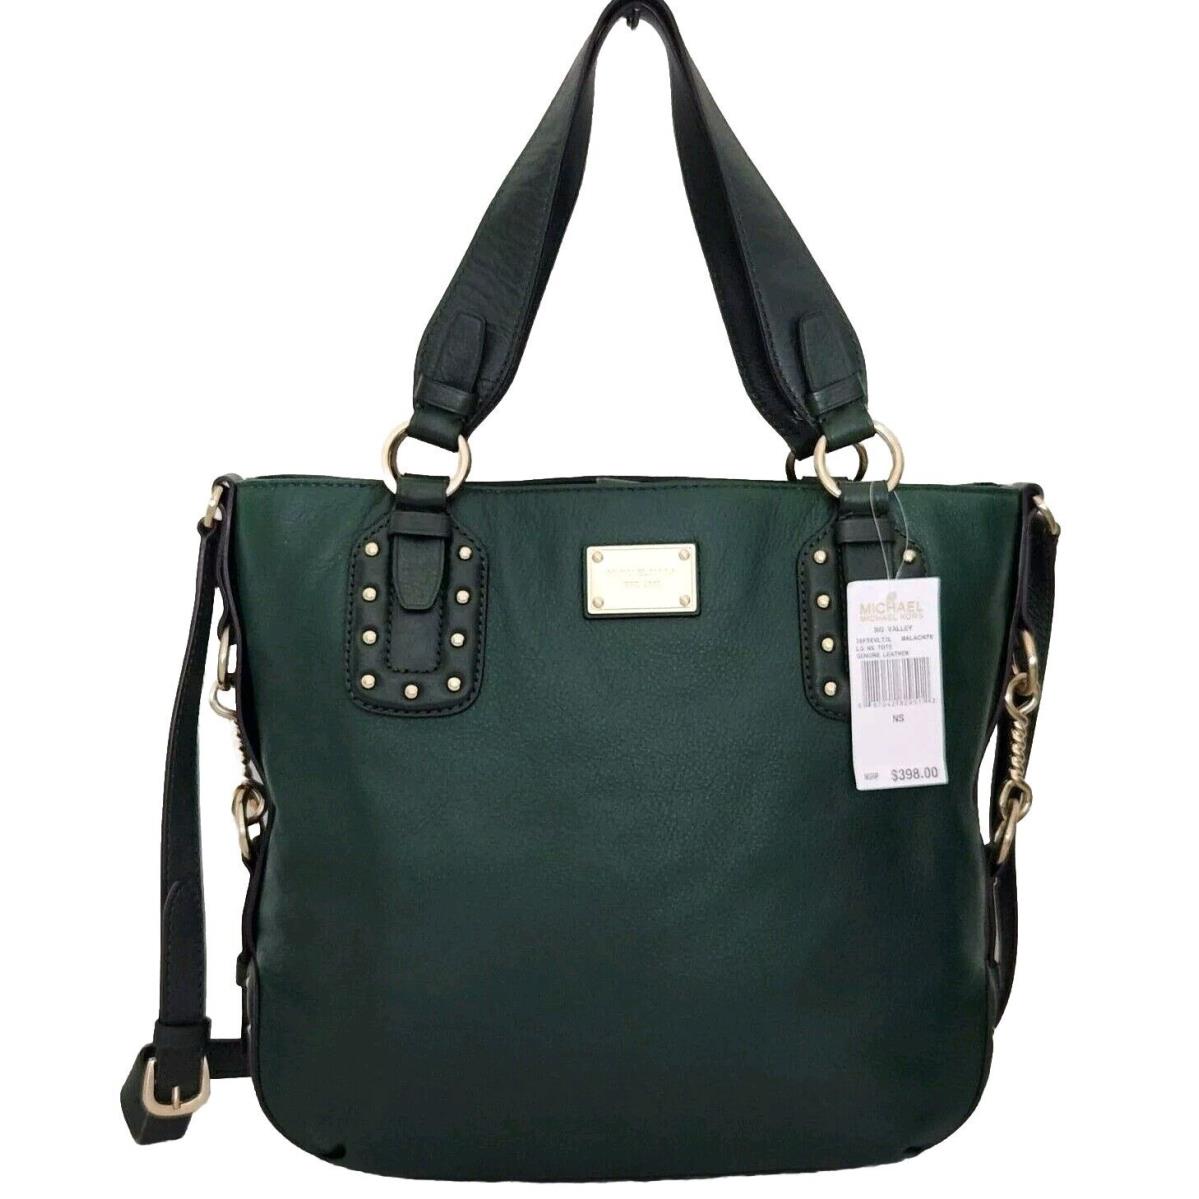 Michael Kors Big Valley Studded Large Malachite Green Leather Tote Bag